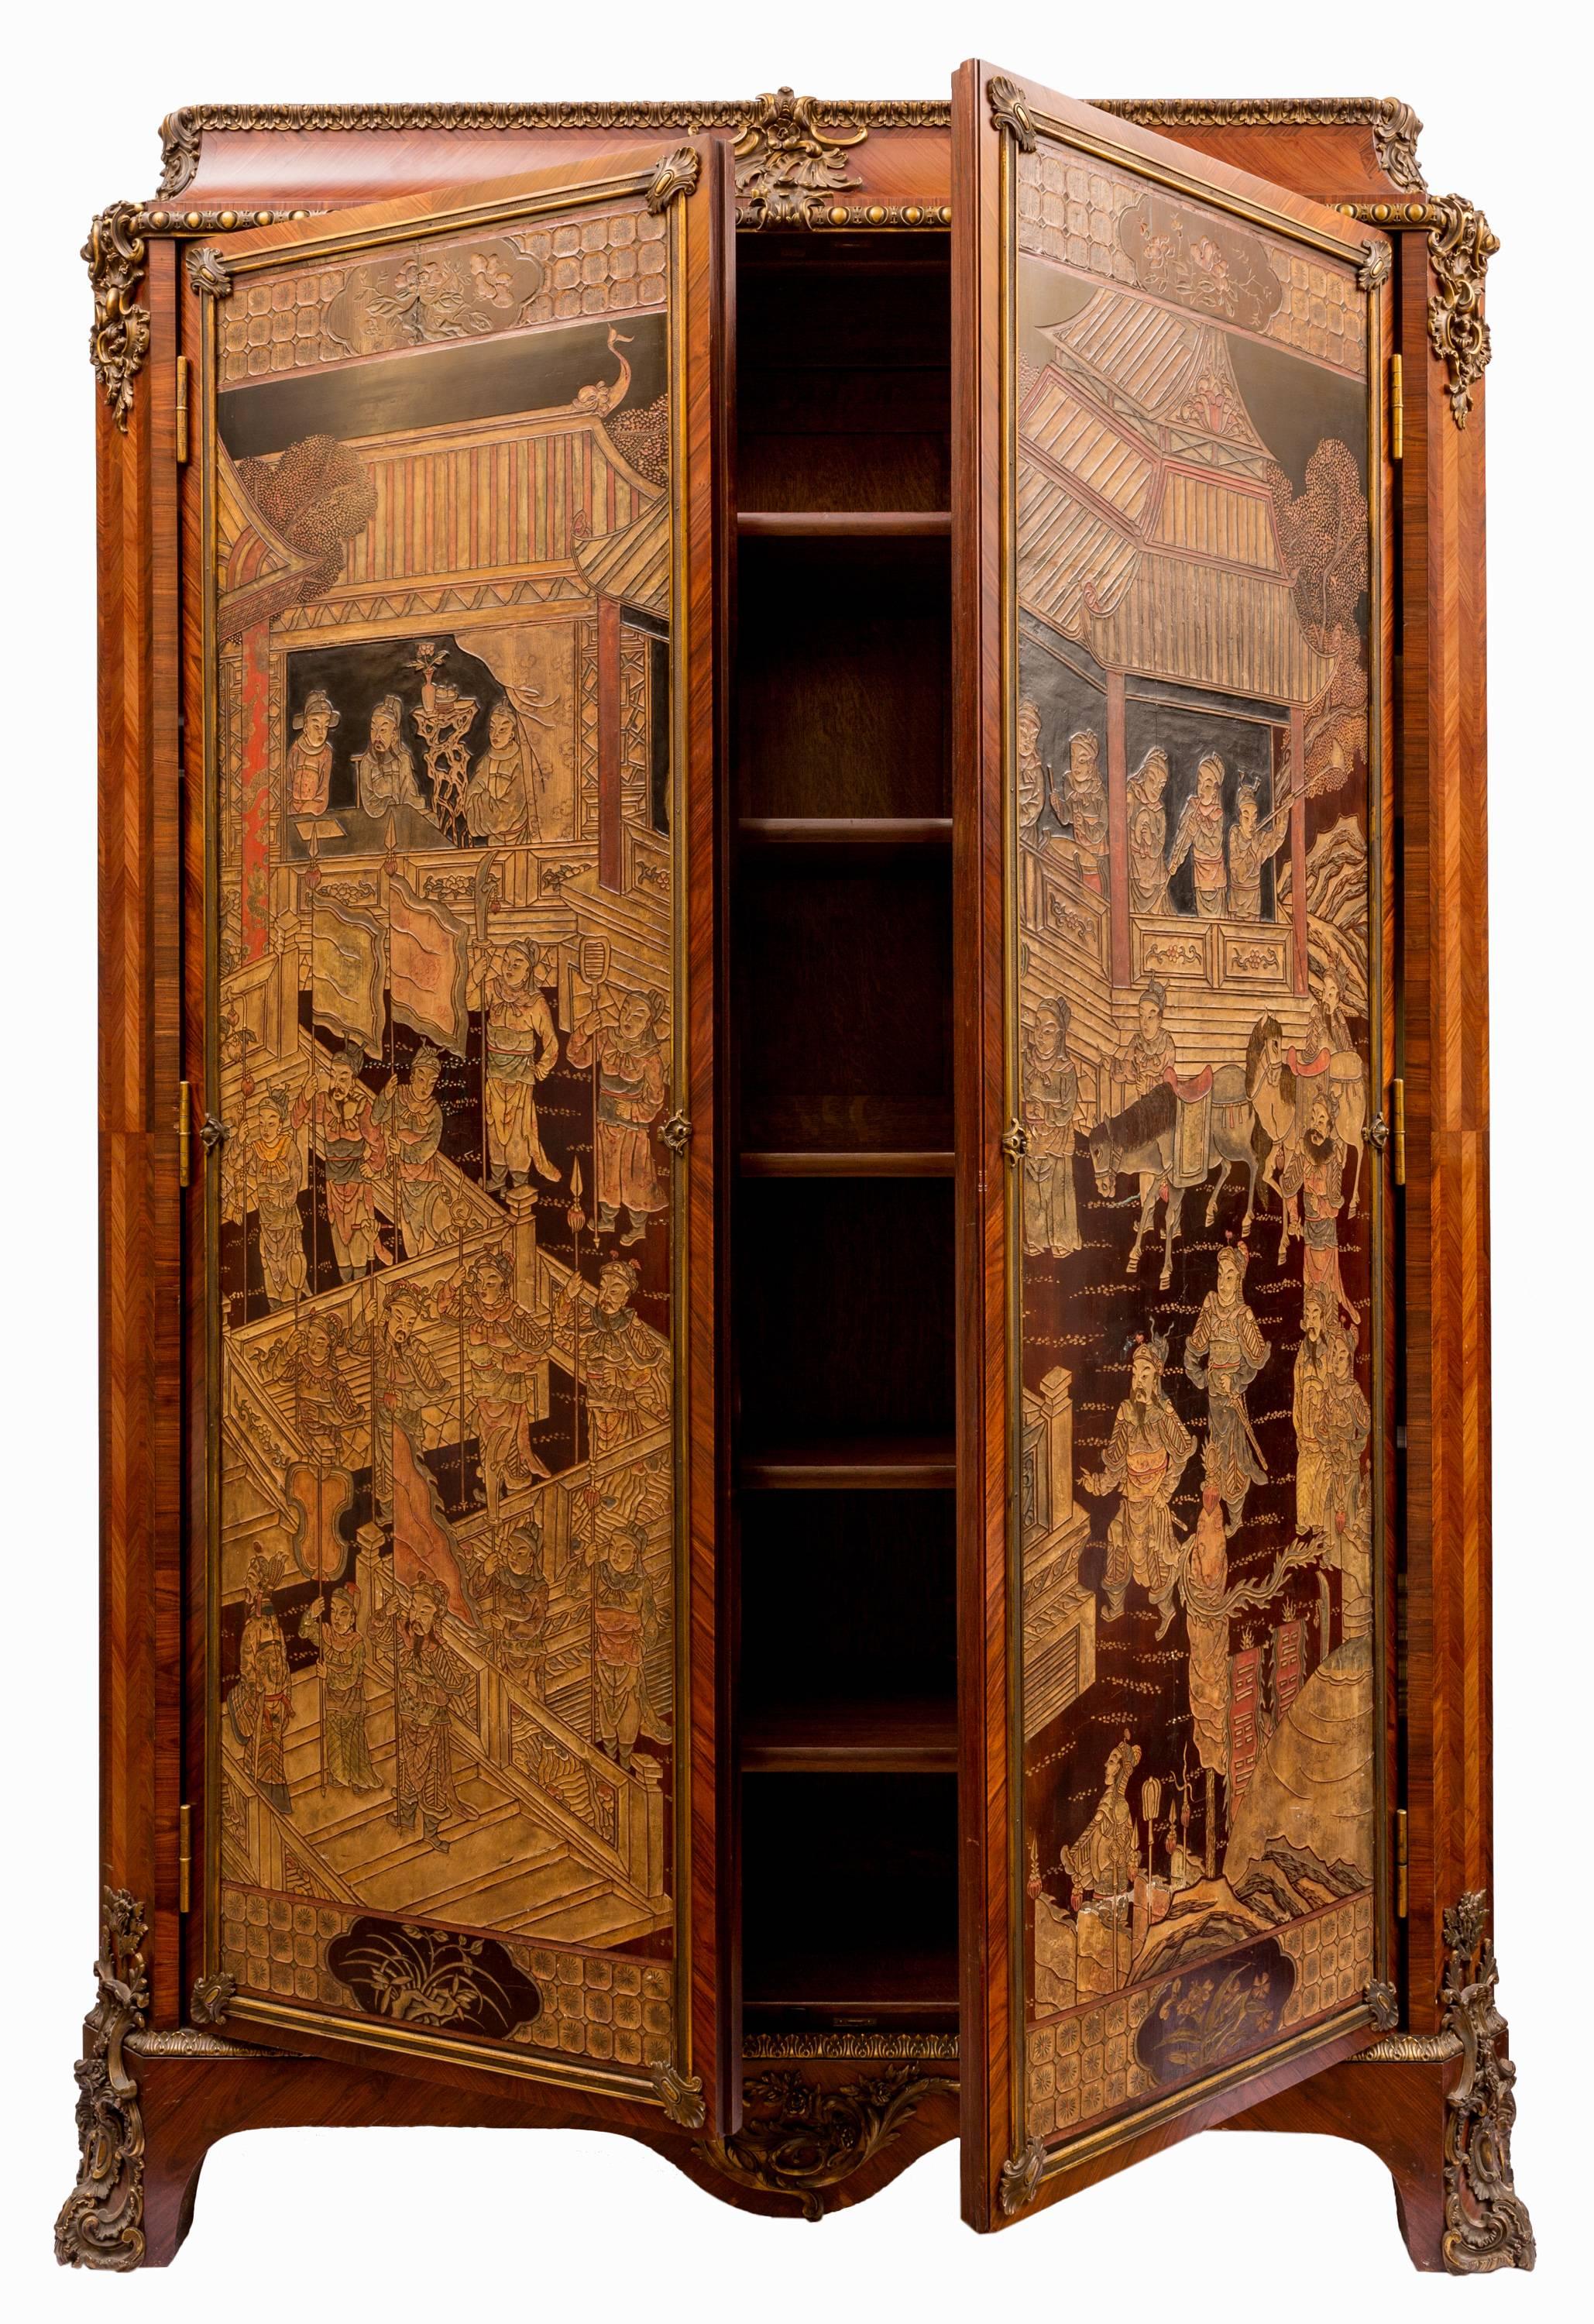 This 19th century French Armoire in Louis XV style has two full-length Chinese Coromandel lacquered panels decorating its front doors. The panels are matched, and present a detailed scene with many Chinese figures in a moment of pageantry. The form